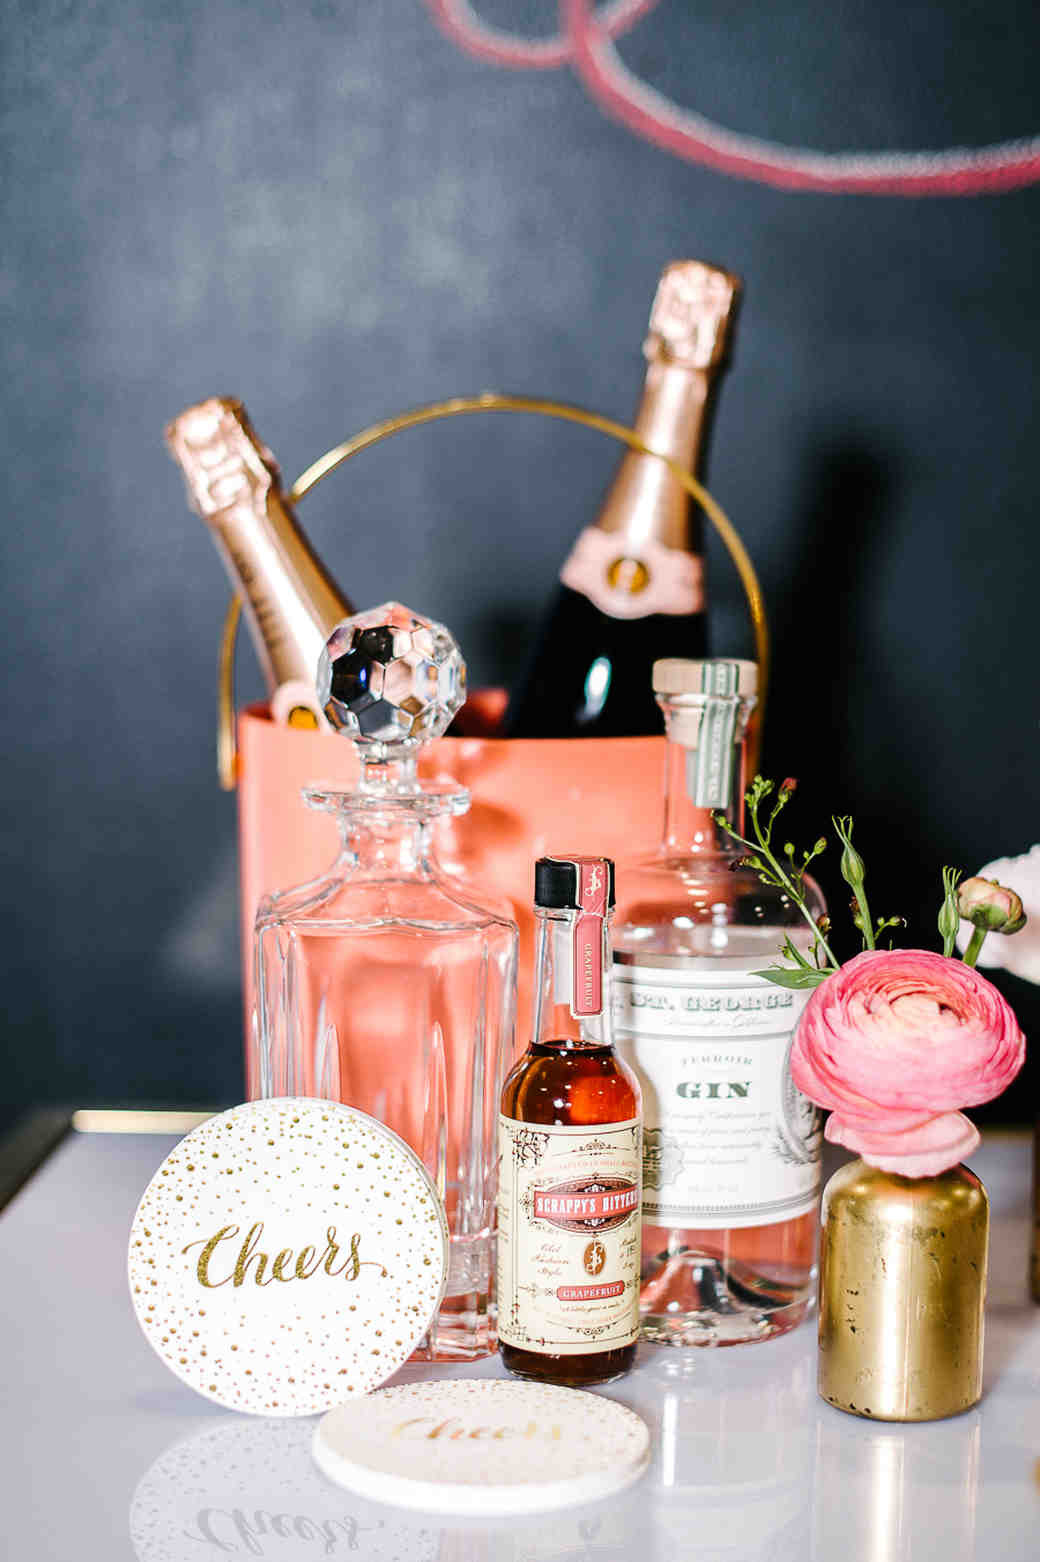 Wedding Shower Ideas And Themes
 37 Bridal Shower Themes That Are Truly e of a Kind